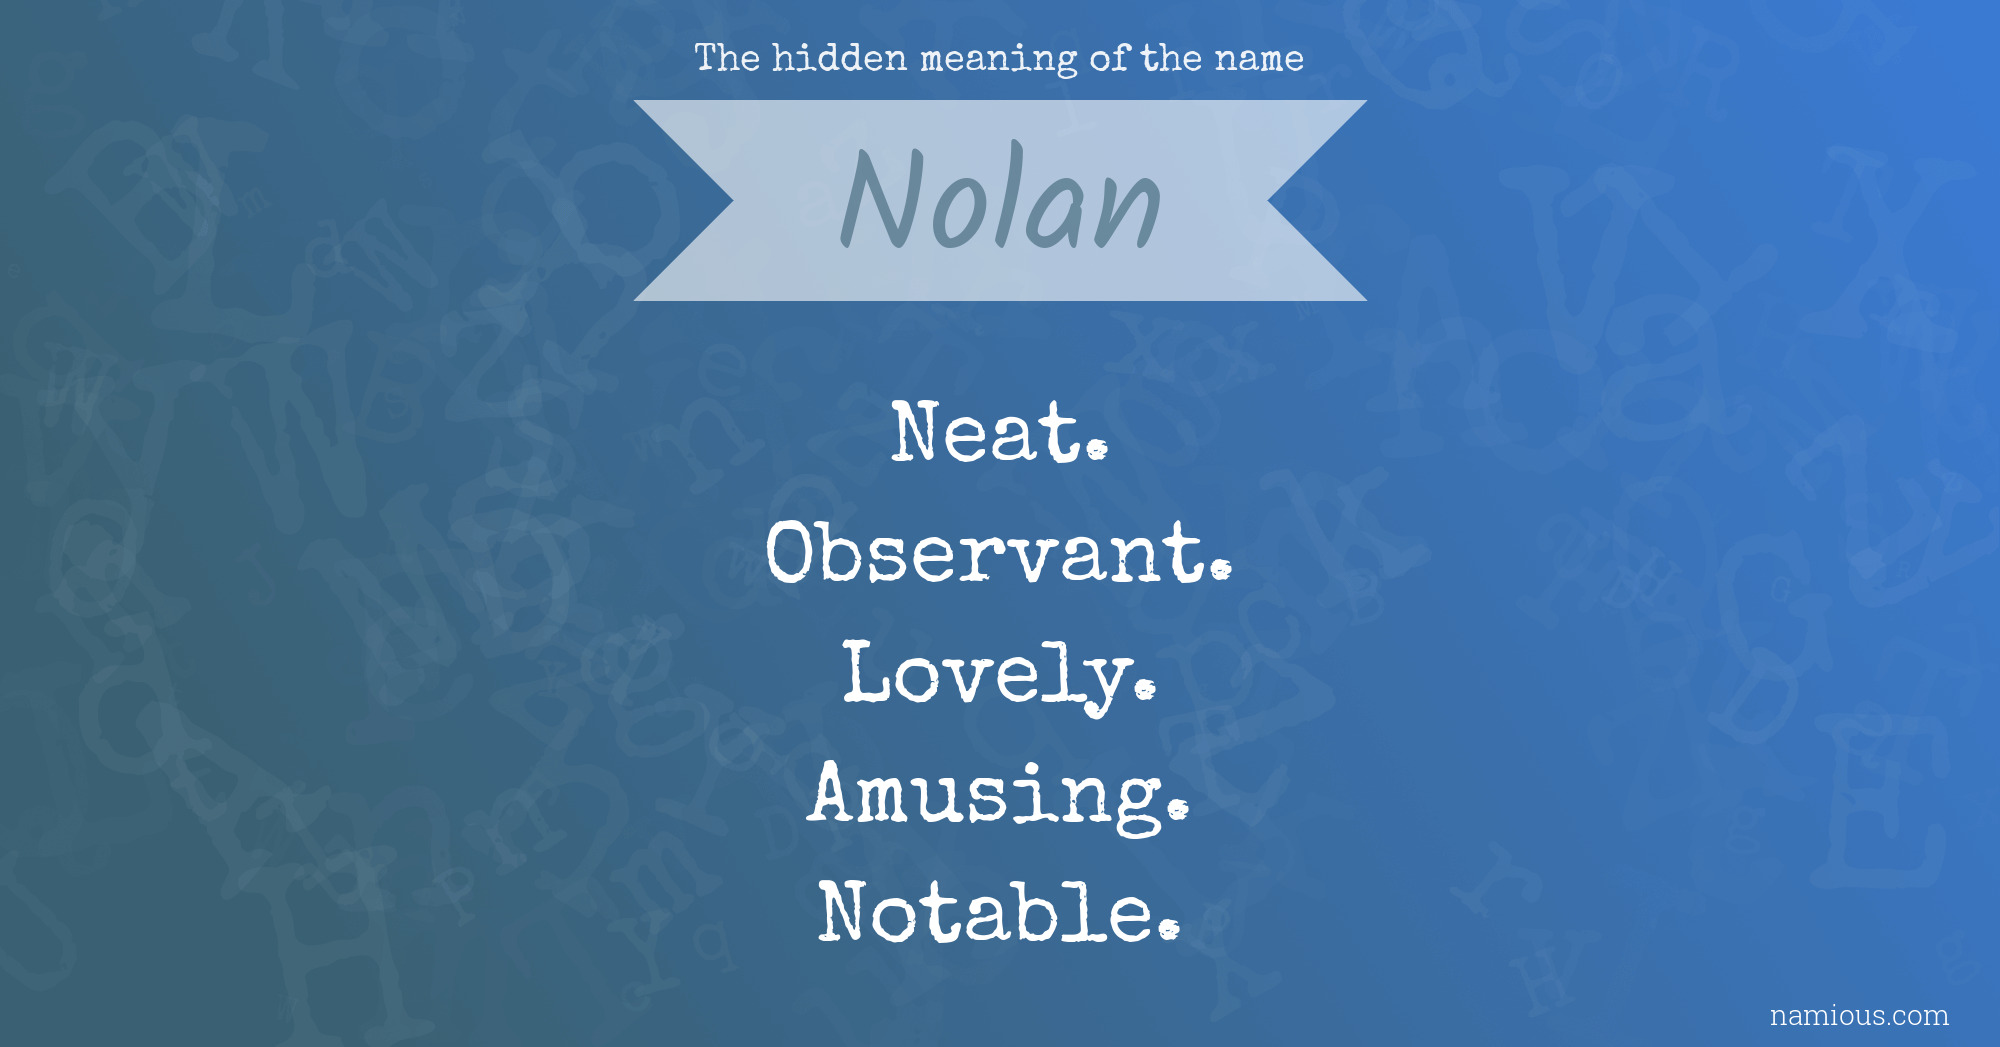 The hidden meaning of the name Nolan